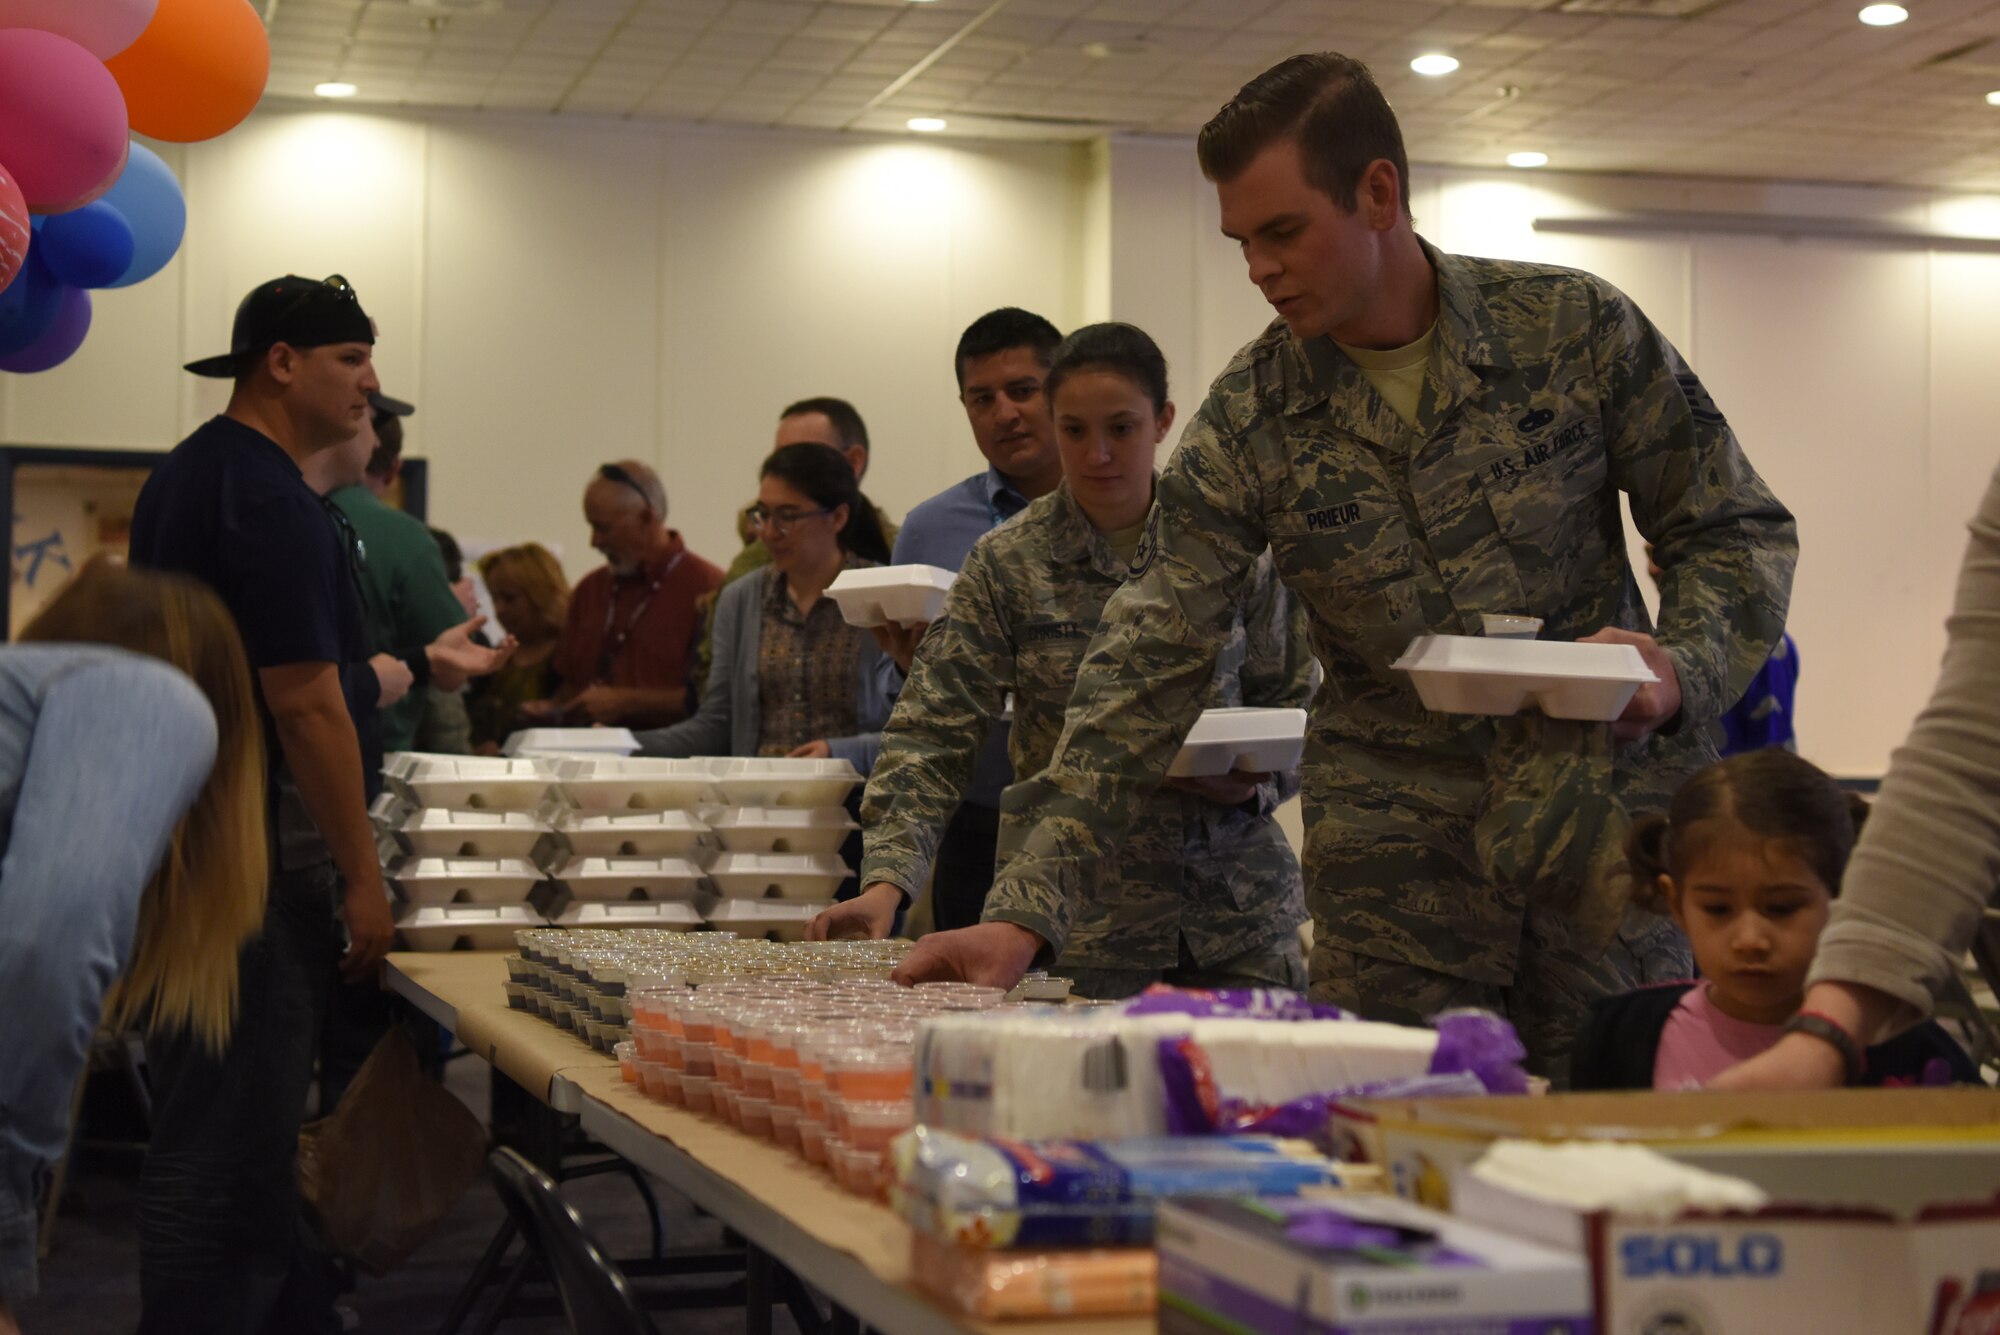 Attendees of the Asian-American Pacific Islander Heritage Cultural Show and Luncheon recieve their food at Kirtland Air Force Base, N.M., May 22, 2019. The meal included grilled beef, lumpia and kalua pork. (U.S. Air Force photo by Senior Airman Eli Chevalier)